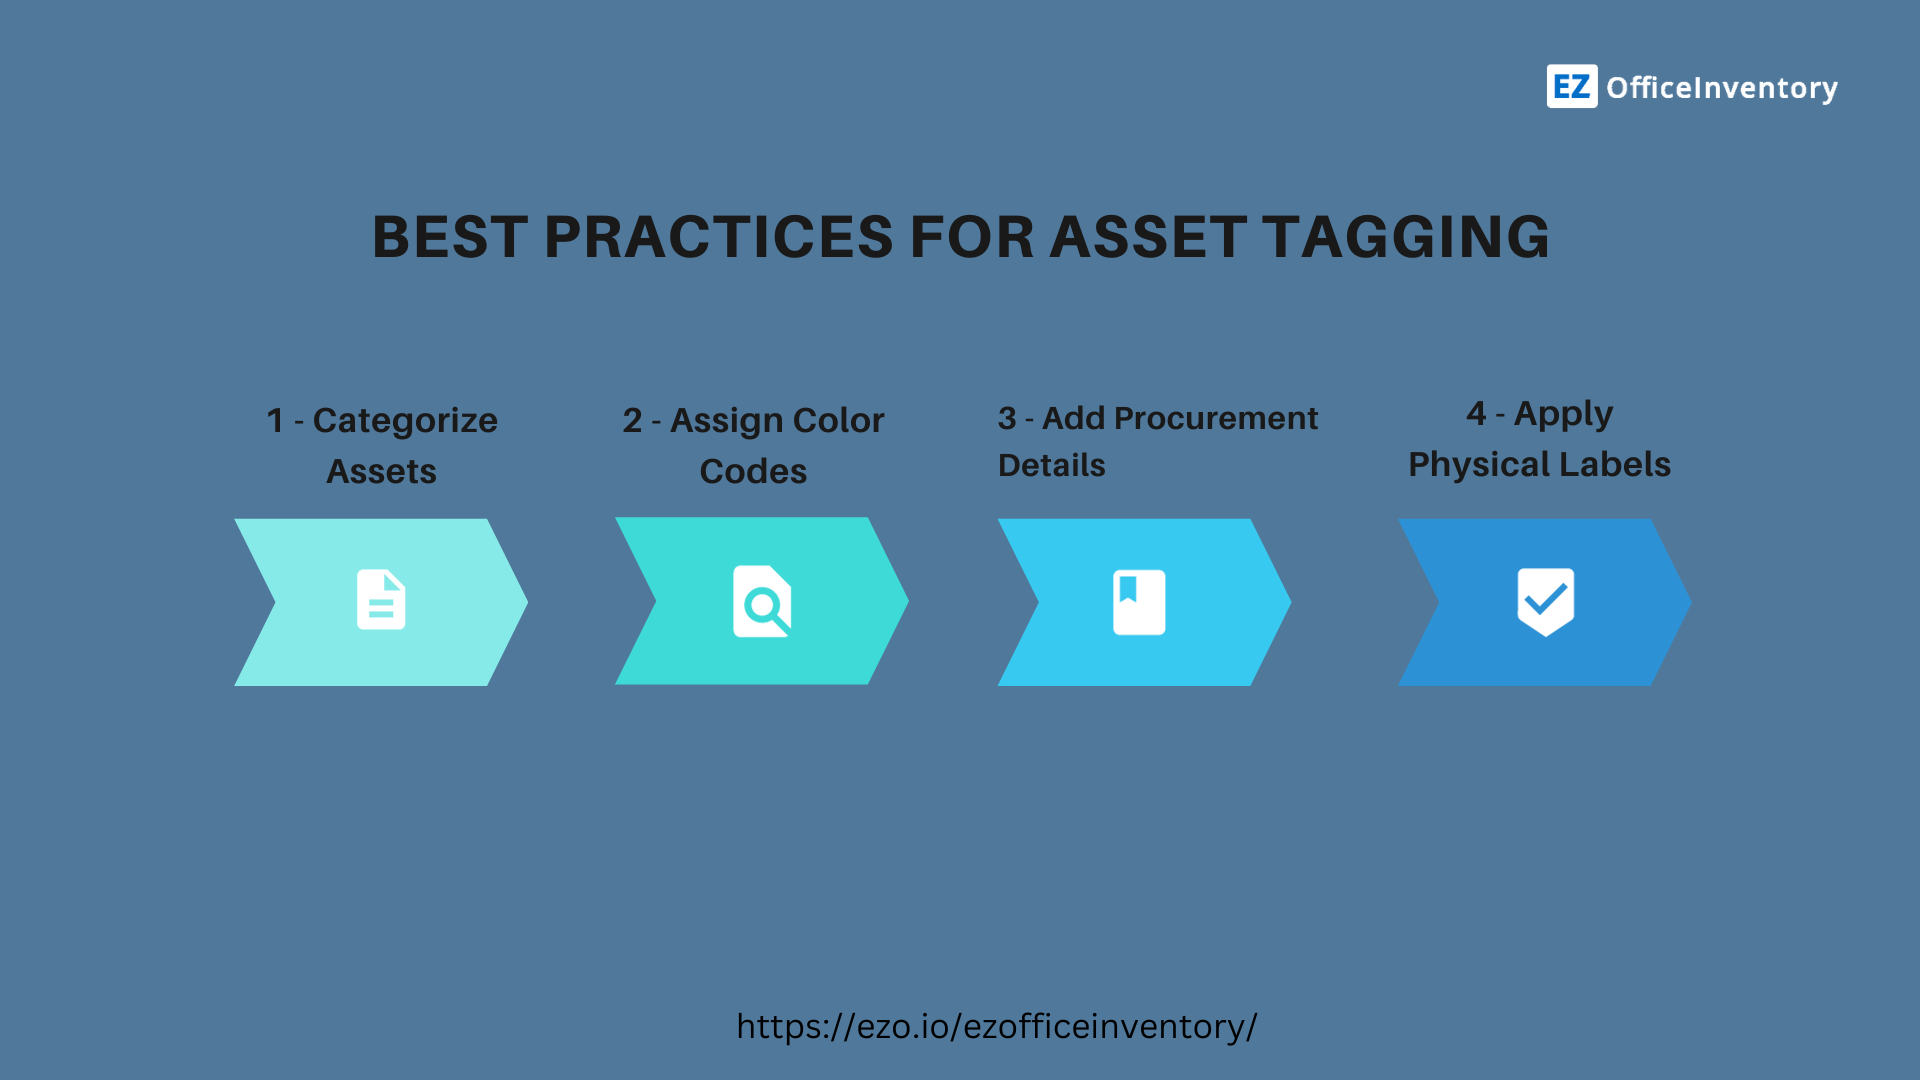 Best practices for asset tagging